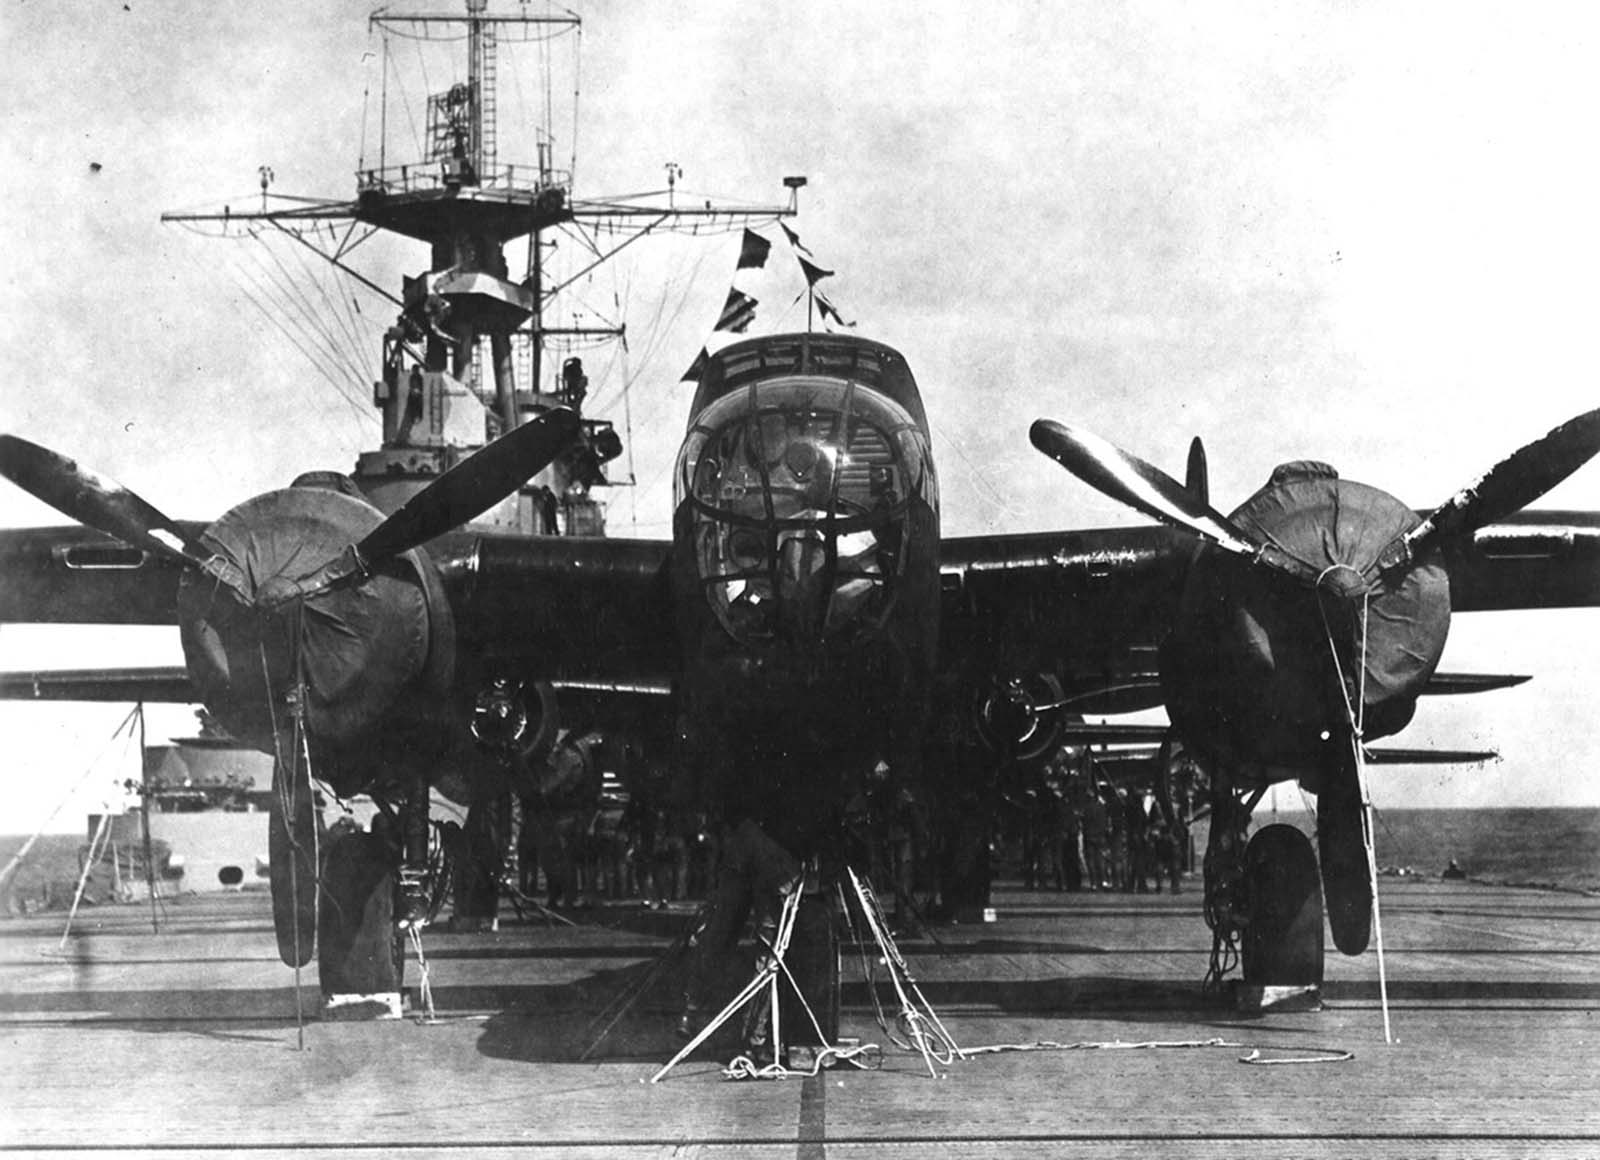 A crew member checks the lashings on his bomber aboard the USS Hornet, while behind him other crews check their planes in preparation for the Doolittle Raid on April 18, 1942.